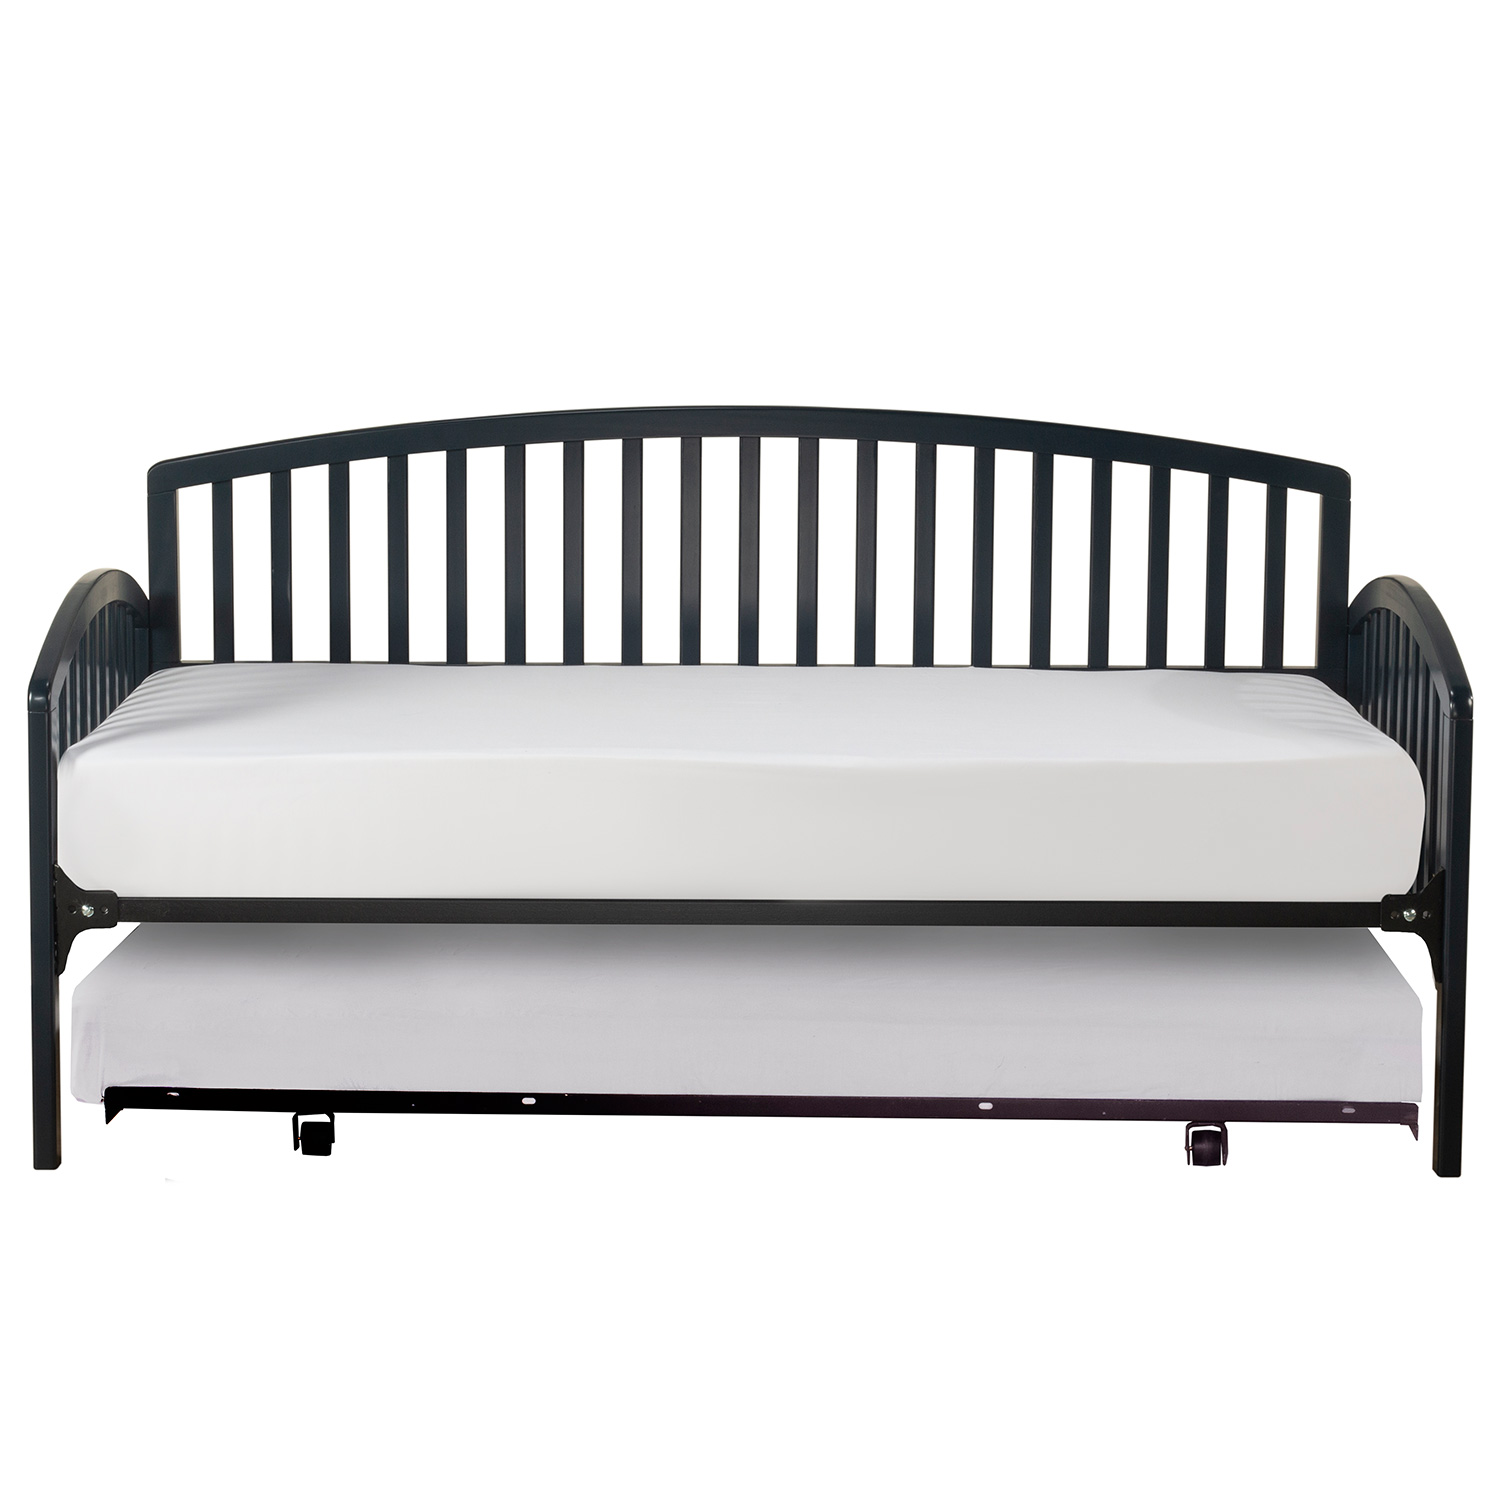 Hillsdale Carolina Daybed with Roll Out Trundle Unit - Navy